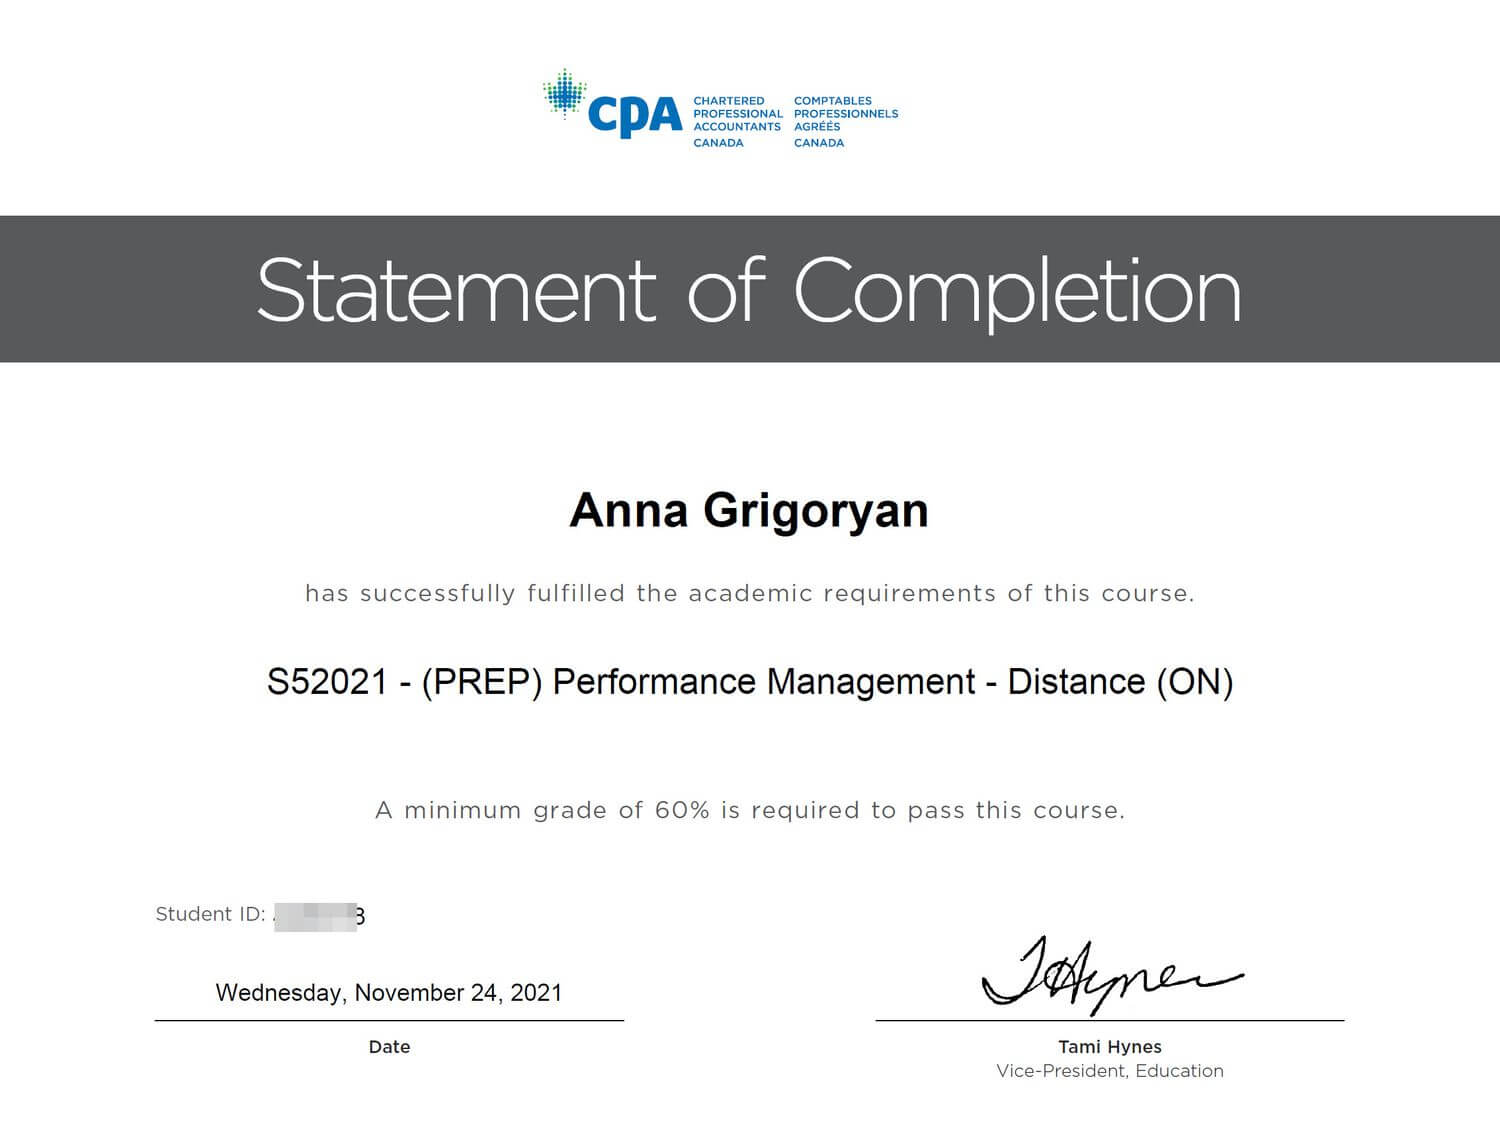 Corporate accountant Anna Grigoryan's CPA certificate - Performance Management